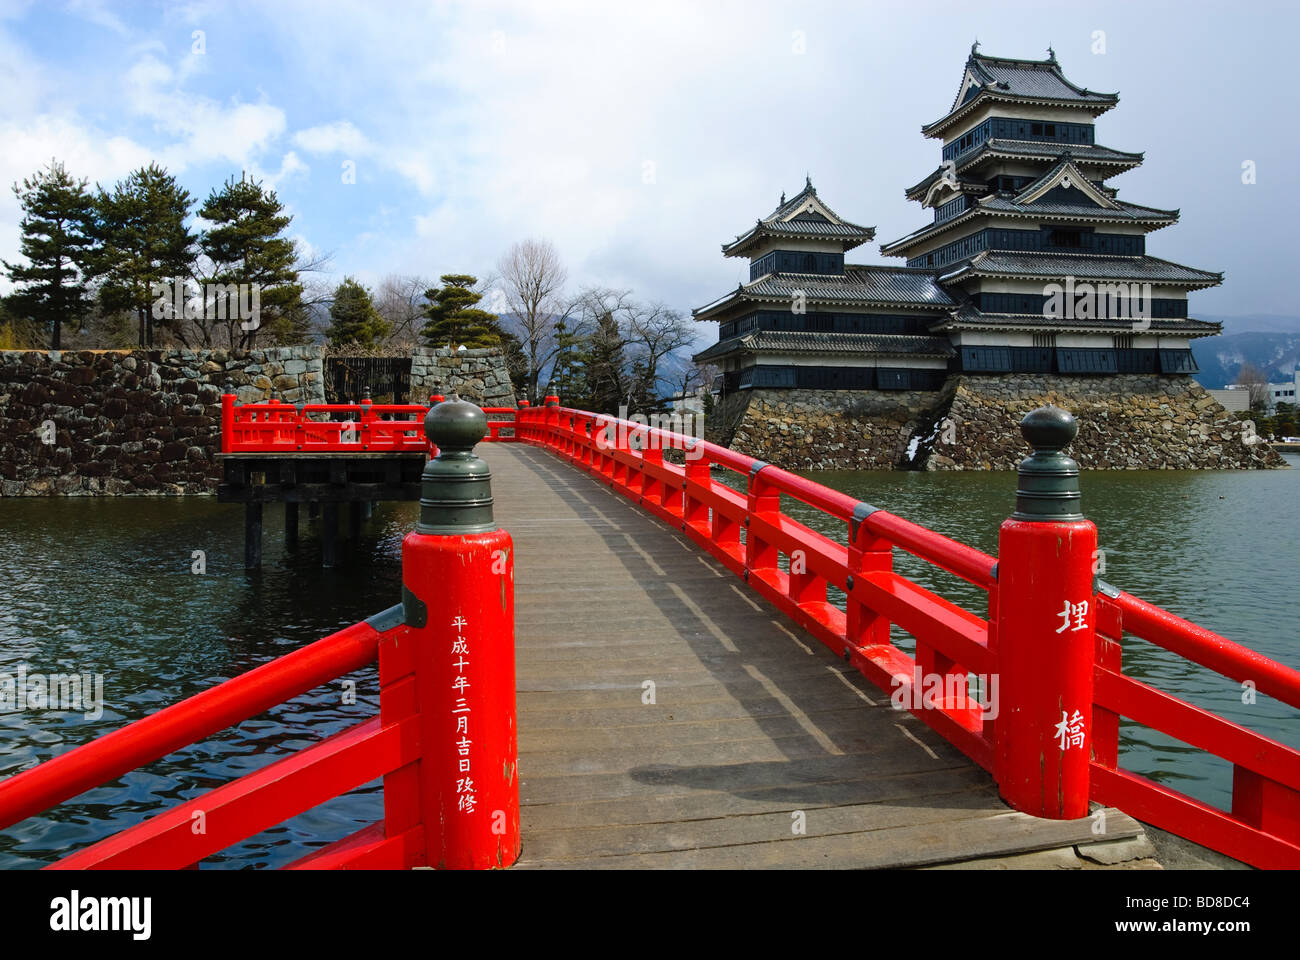 Historic castle in Matsumoto Japan typical Japanese architecture Stock Photo